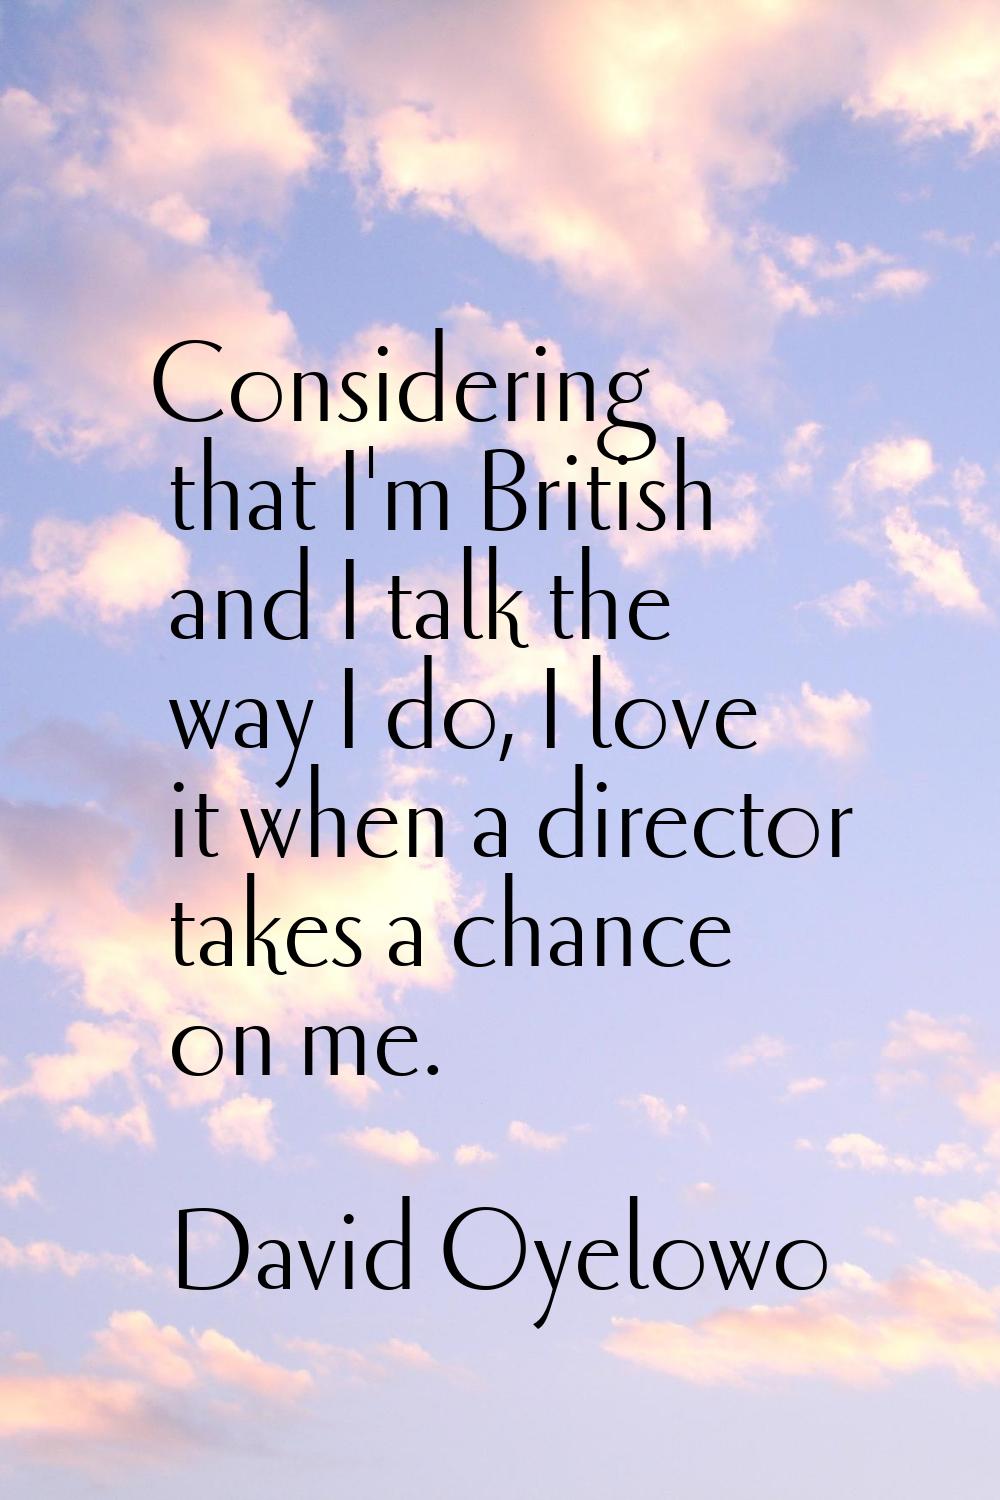 Considering that I'm British and I talk the way I do, I love it when a director takes a chance on m